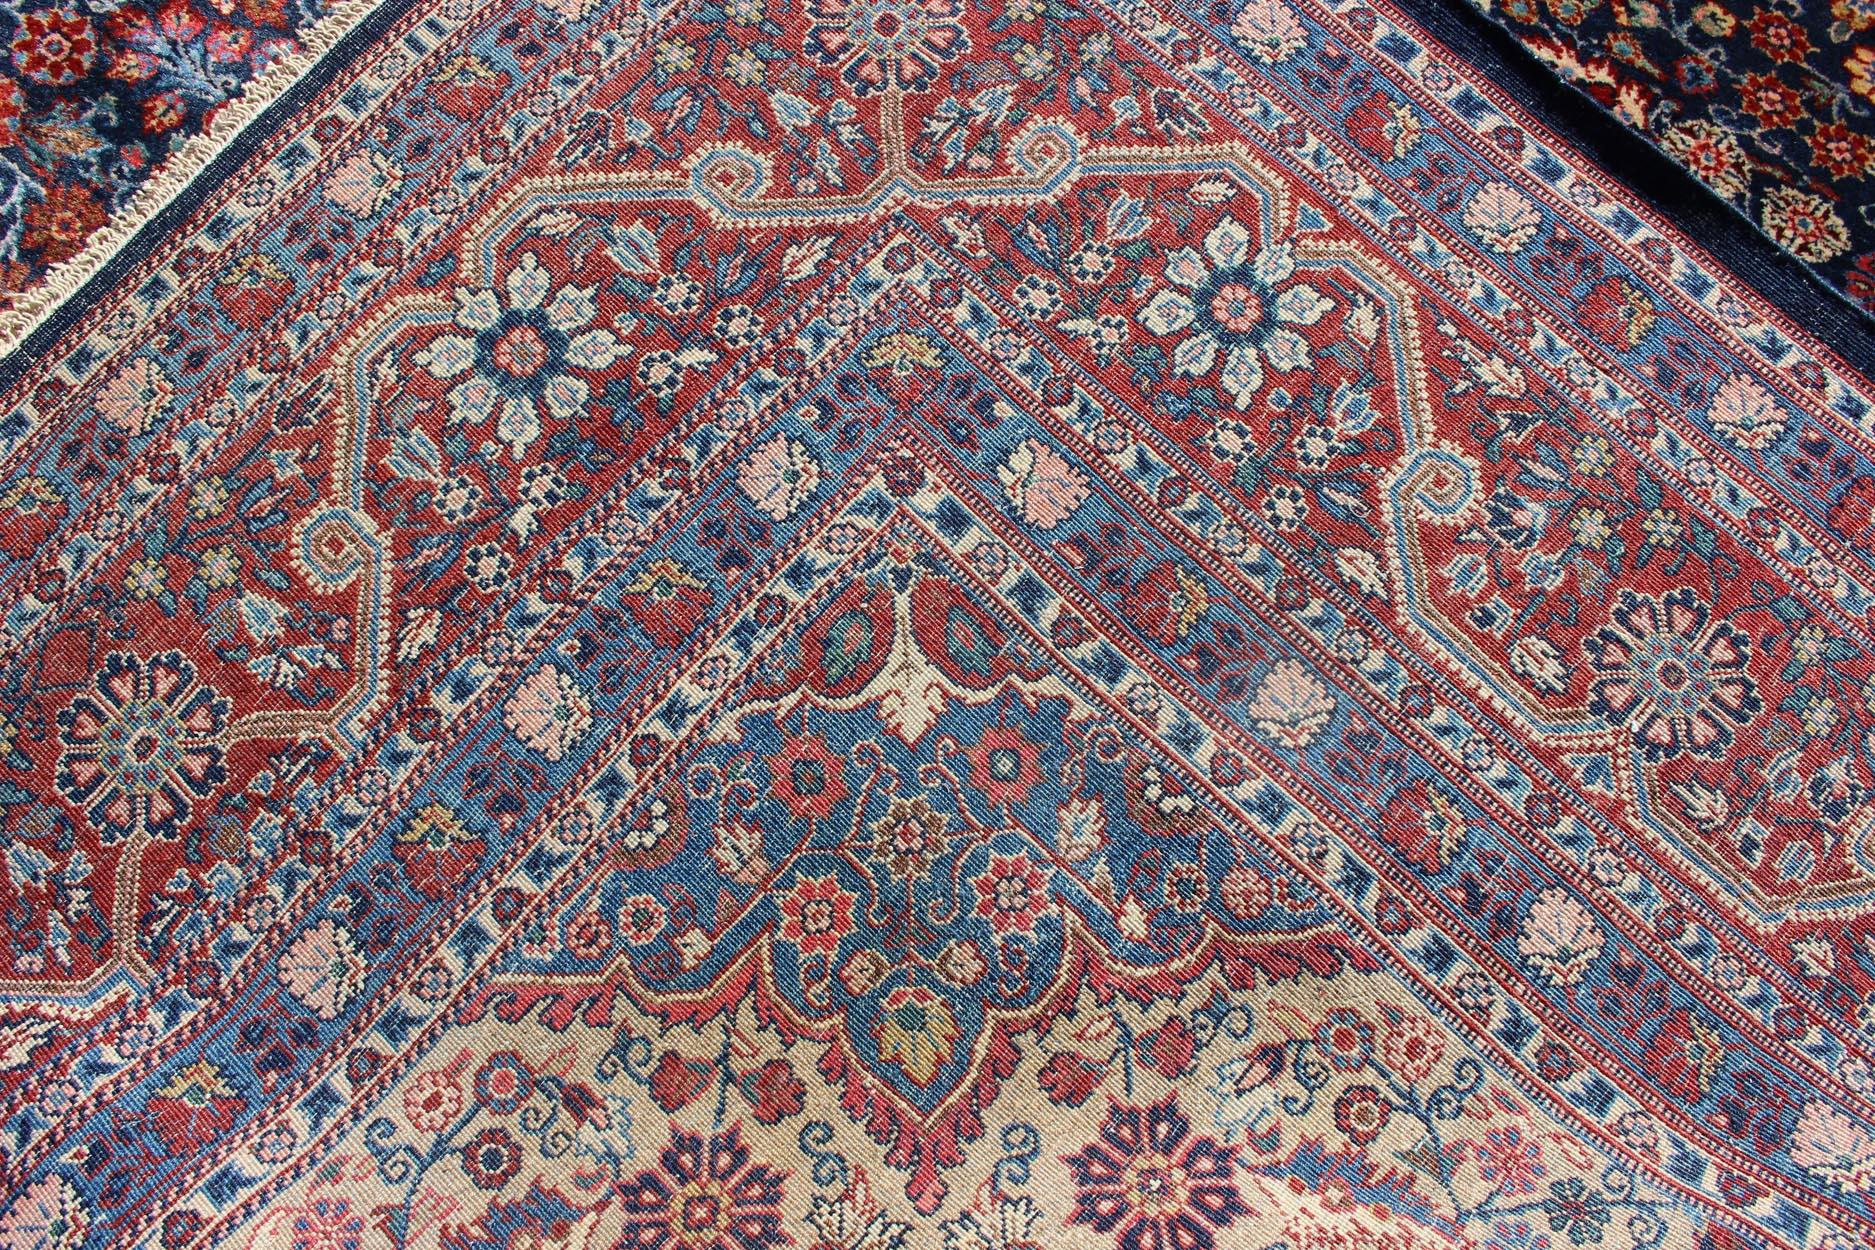 Antique Tribal Medallion Josan Rug with Jewel Tones with Center Medallion In Good Condition For Sale In Atlanta, GA